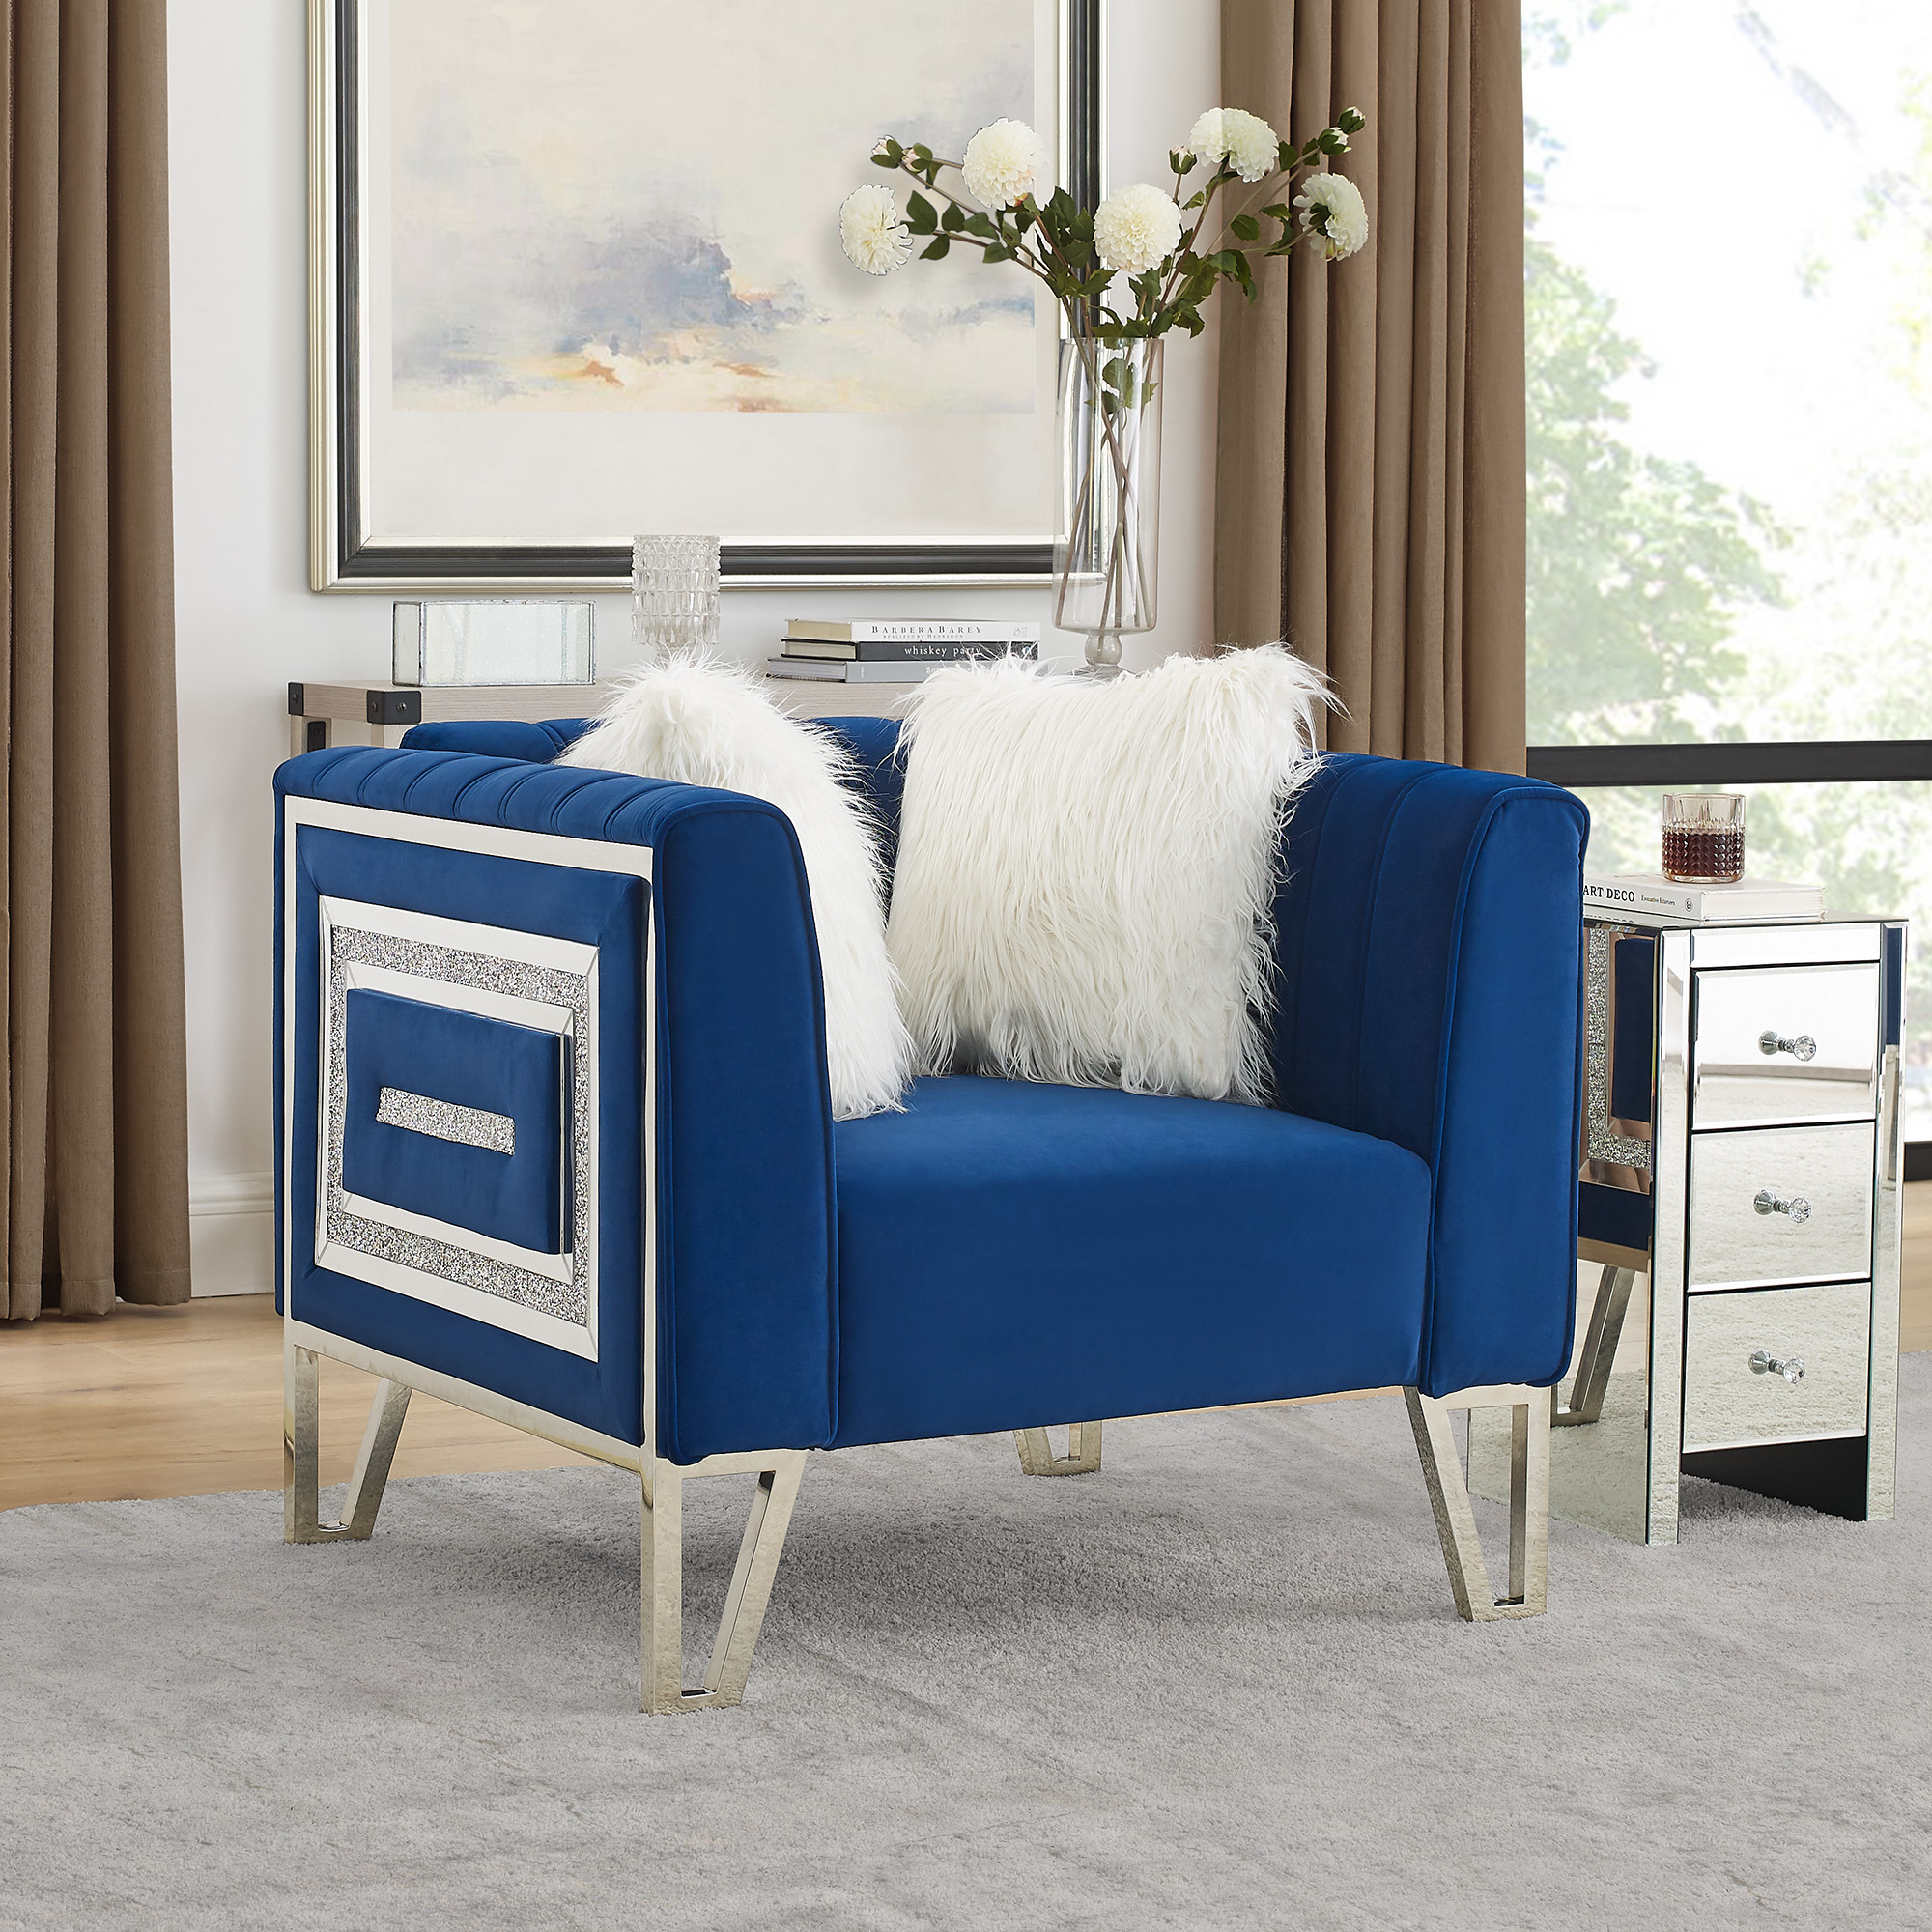 Sofa Chair with Mirrored Side Trim with Faux Diamonds and Stainless Steel Legs, Six White Villose Pillow, Blue (36.5&rdquo;Lx32.75&rdquo;Wx29.5&rdquo;H)